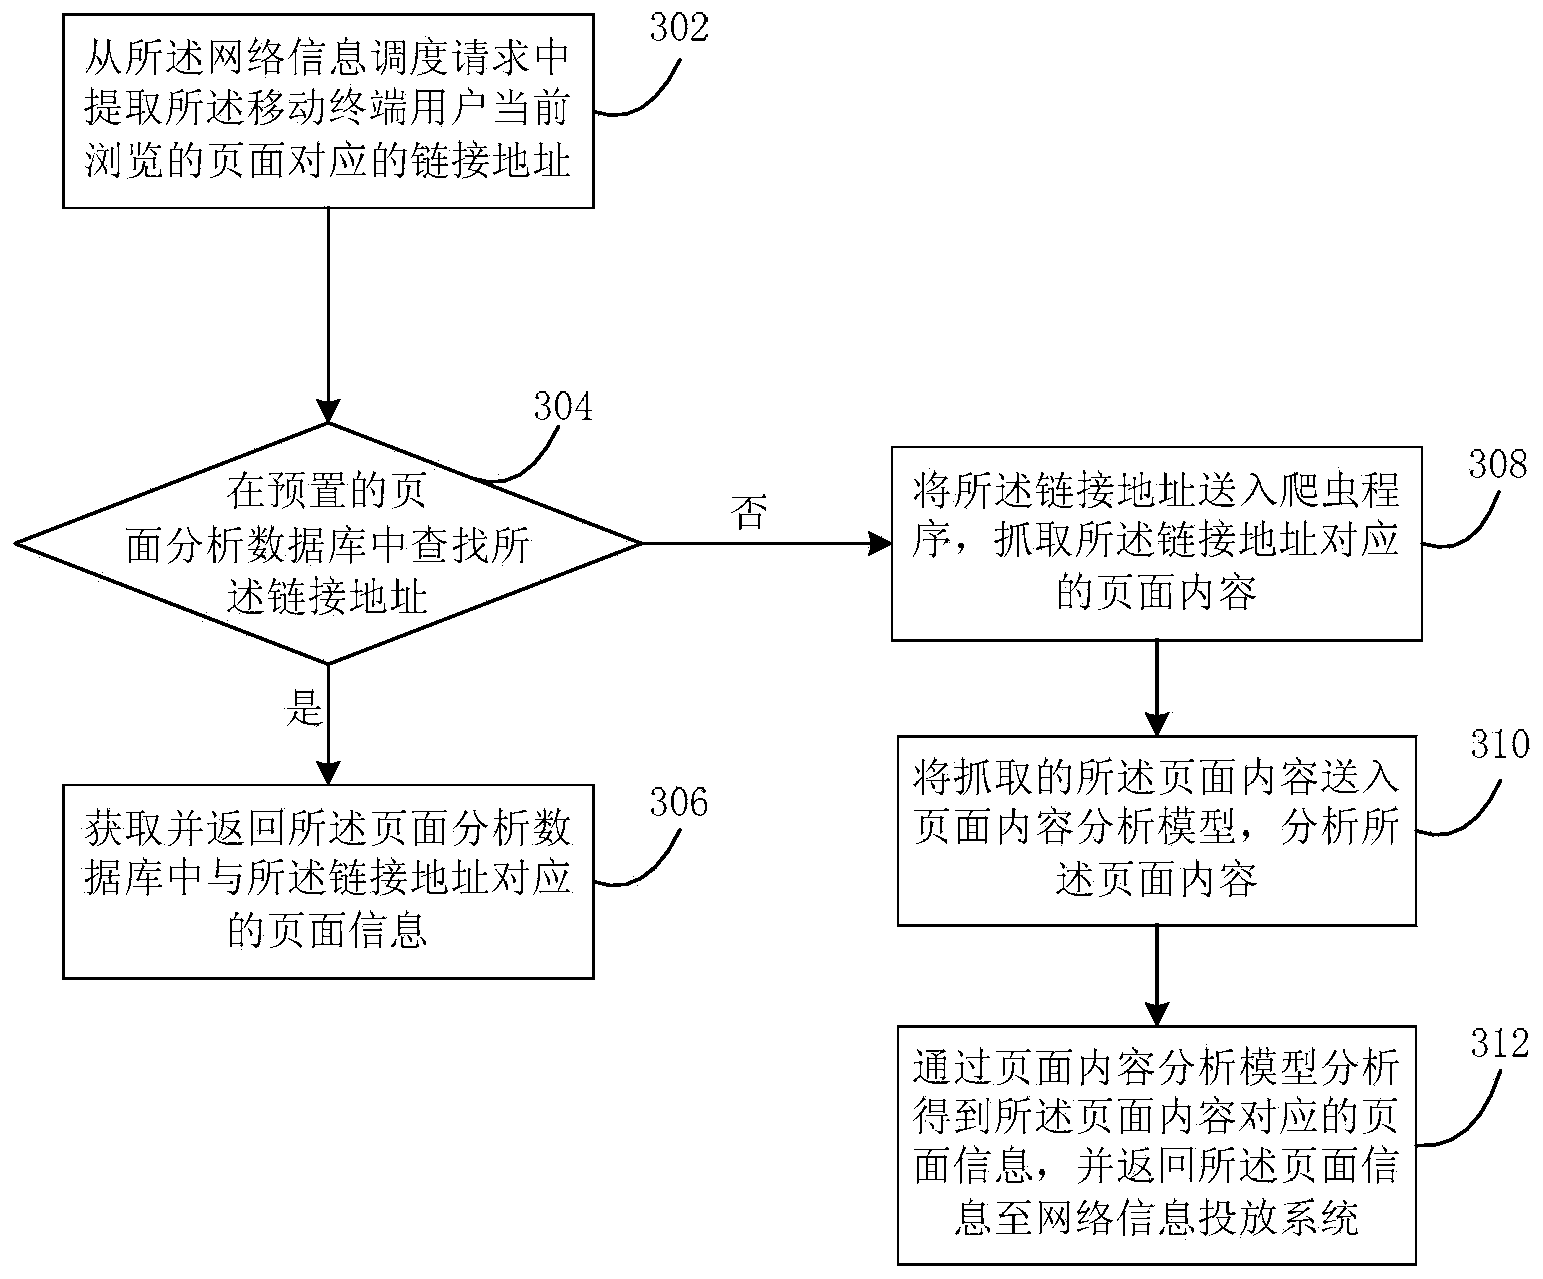 Method and system for issuing network information to mobile terminal